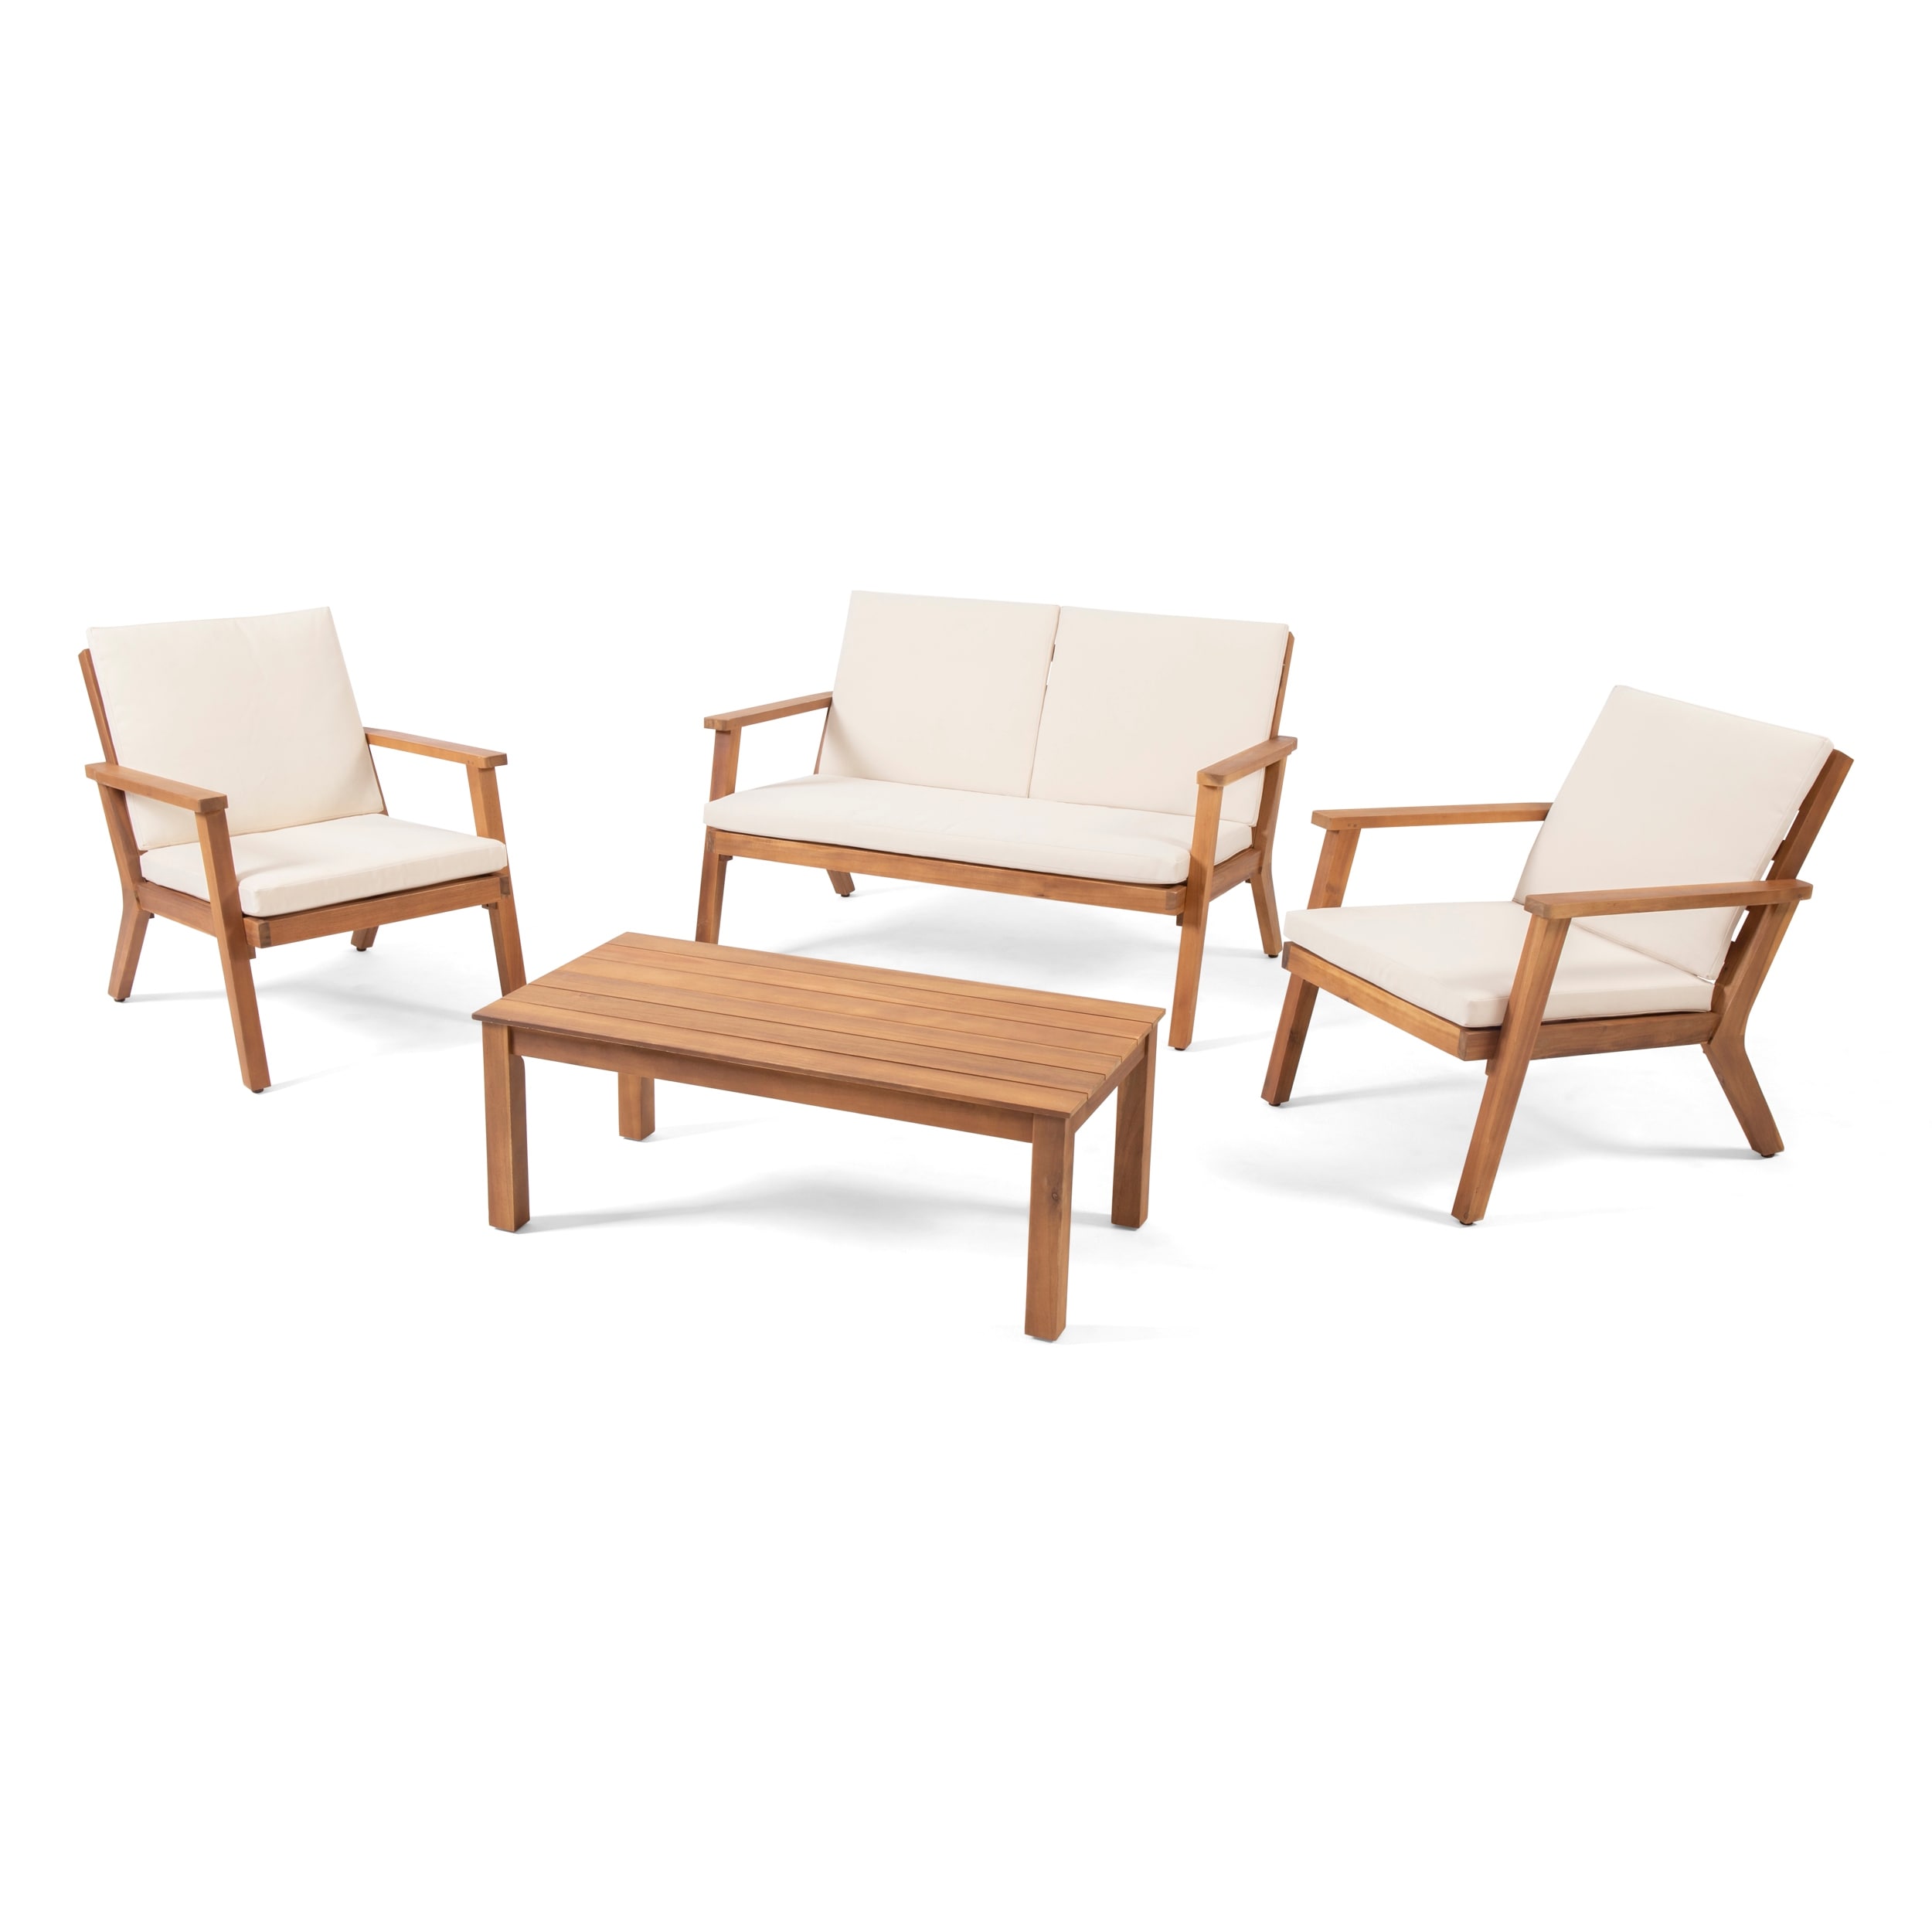 in Teak Finish/Grey Christopher Knight Home 300251 Manarola 4-Piece Outdoor Acacia Wood Chat Set 